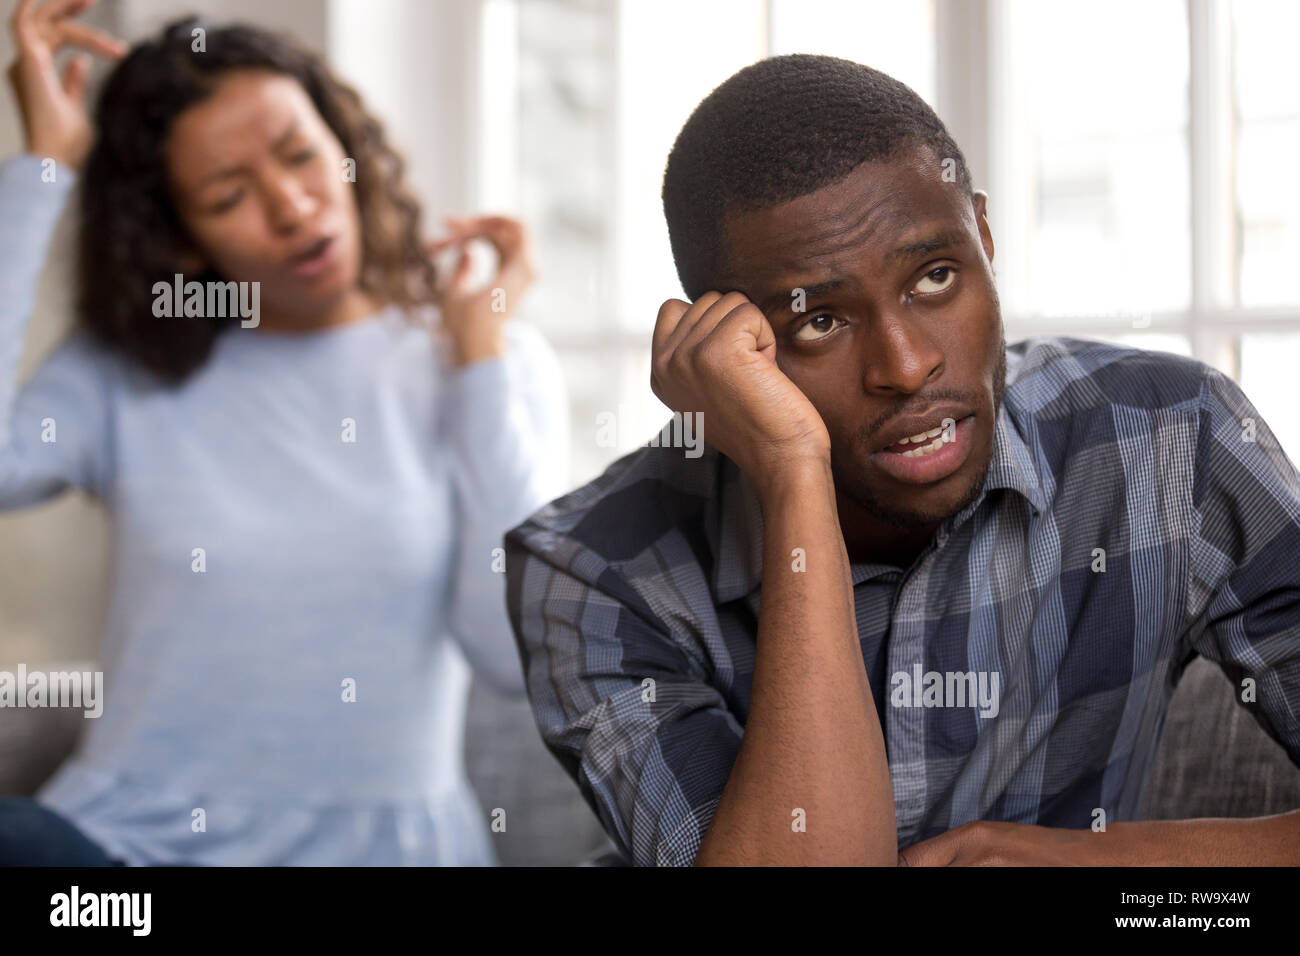 Frustrated black boyfriend tired of girlfriend lecturing Stock Photo